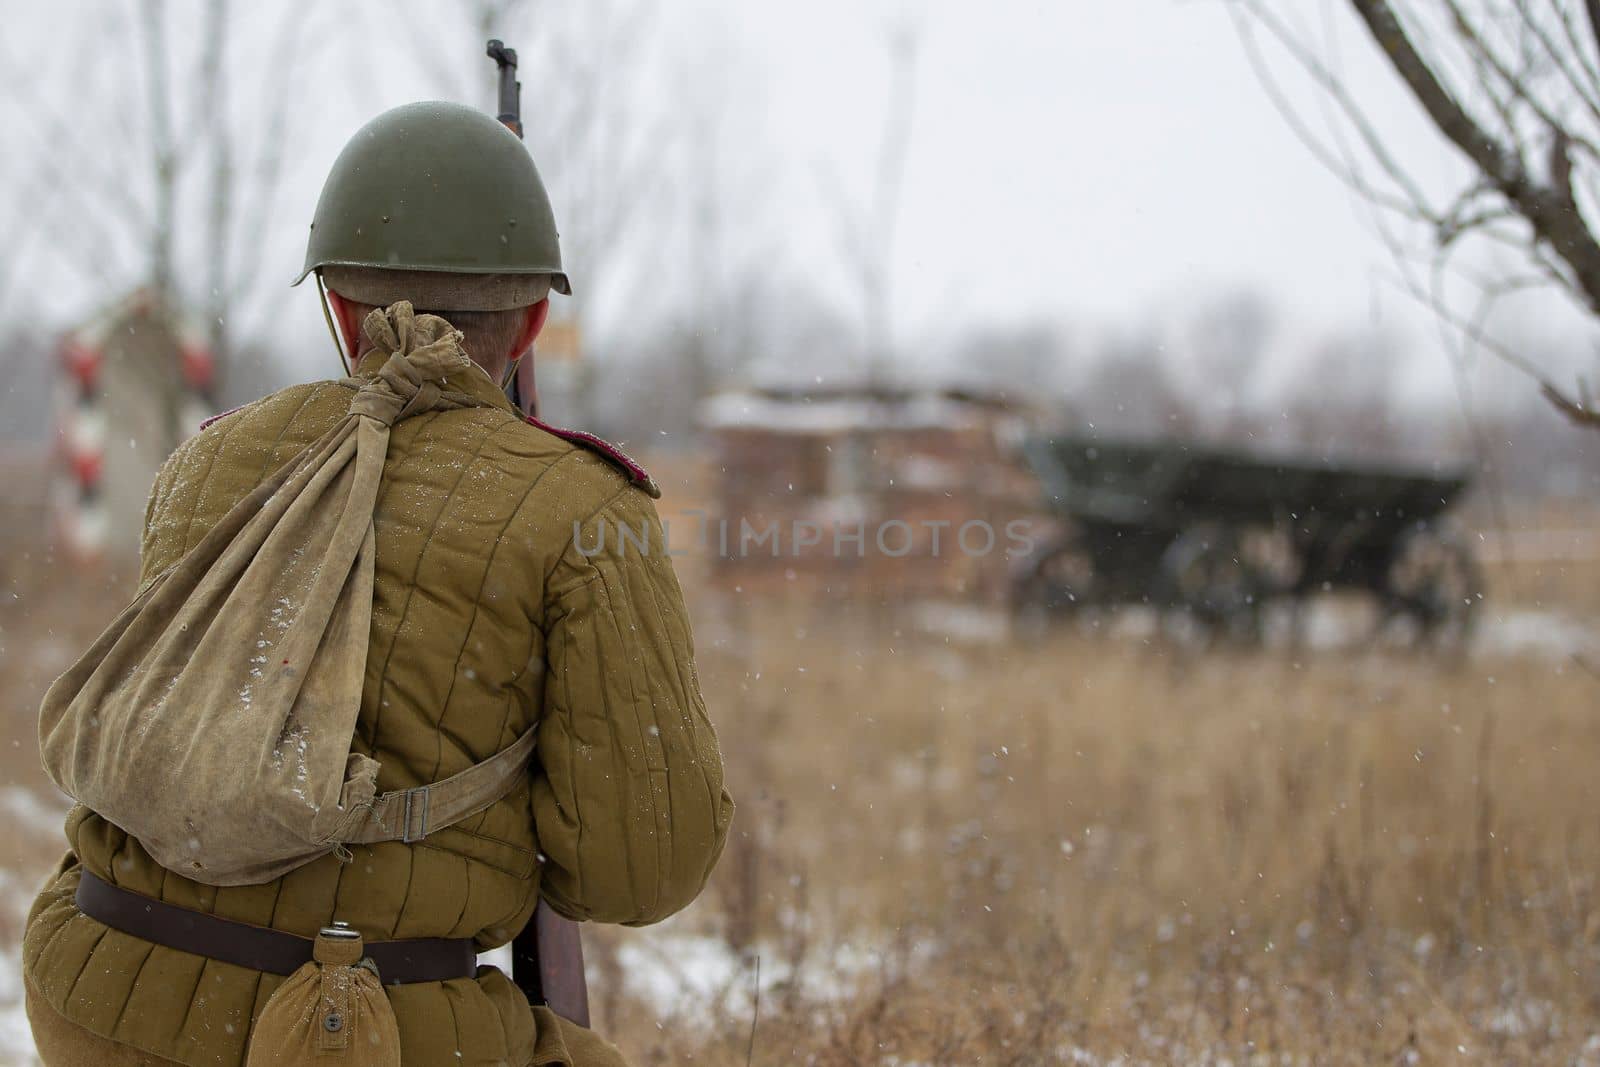 Belarus, Gomil, October 25, 2018 Reconstruction of hostilities. A World War II soldier stands with his back to the camera.